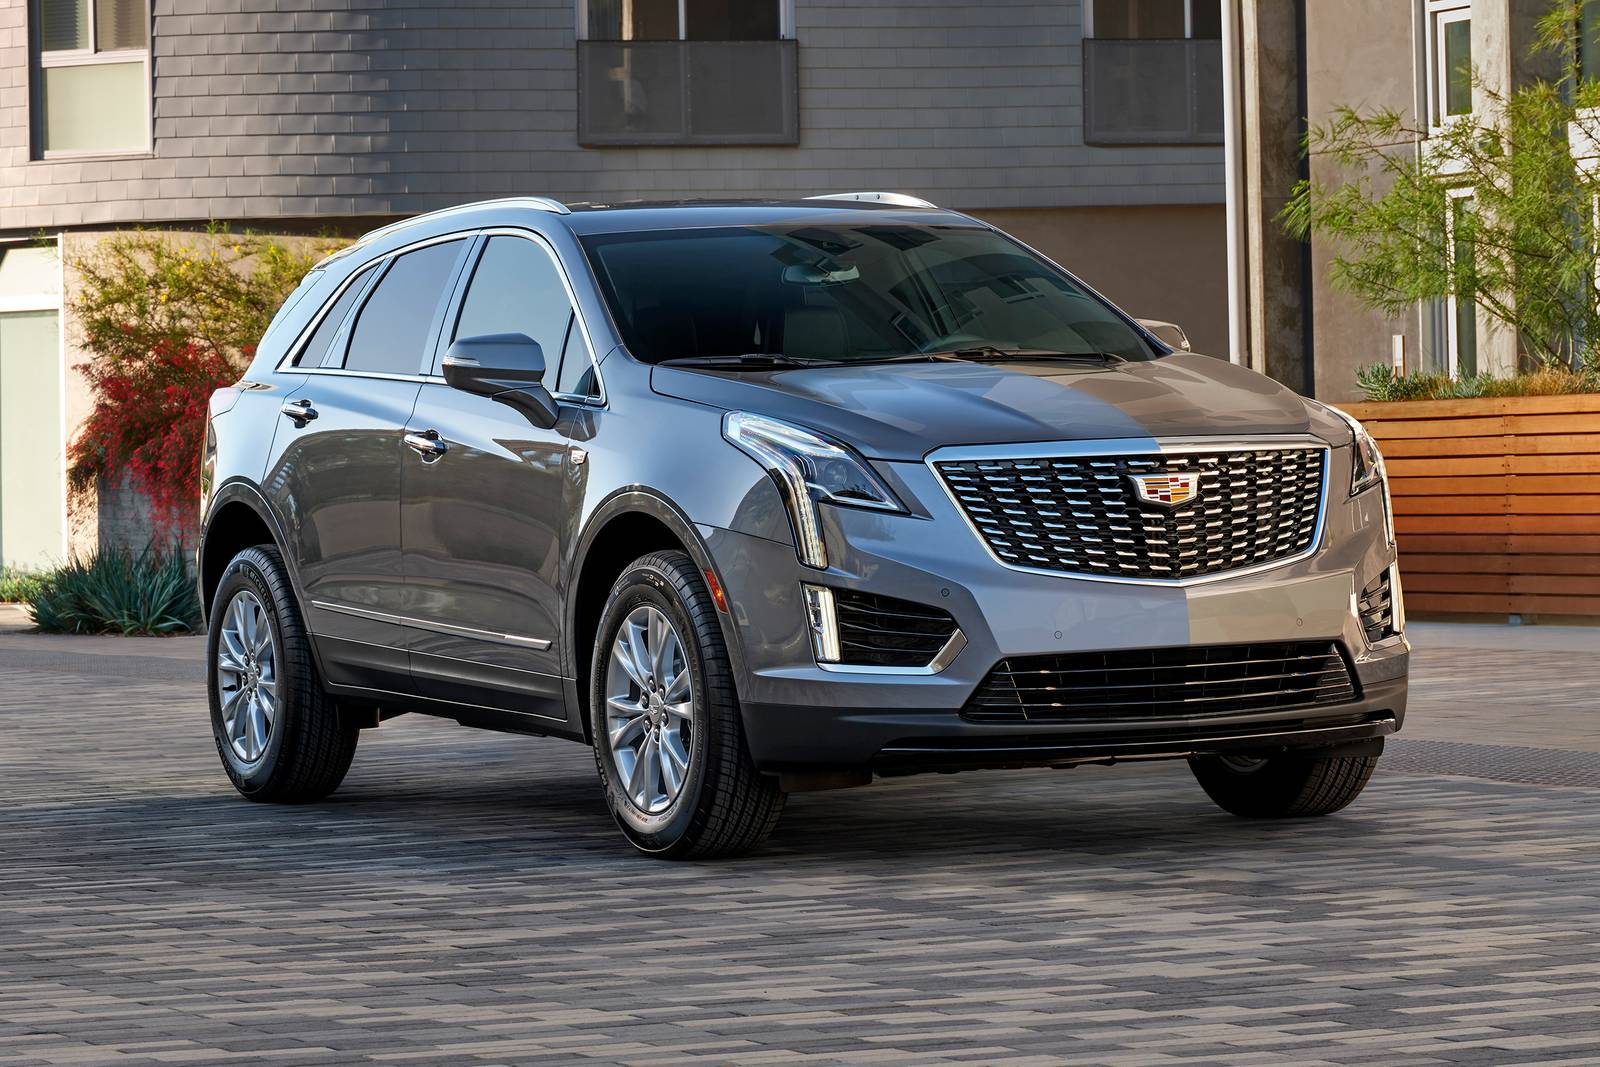 Unveiling the Cadillac XT5: Reviews and Owner Comments